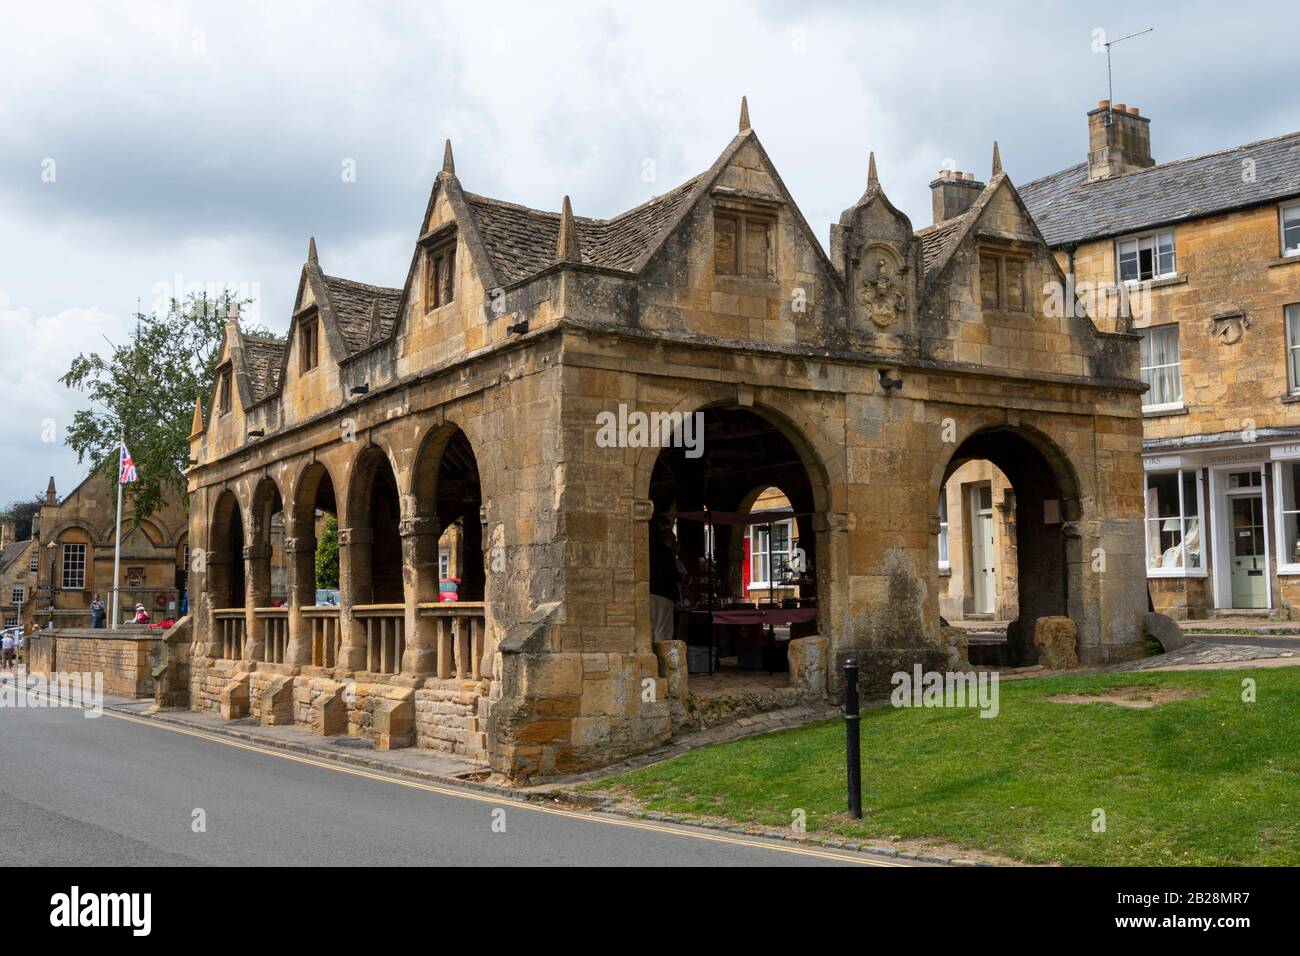 Market Hall, High Street, Chipping Campden, Gloucestershire, Cotswolds, England Stockfoto